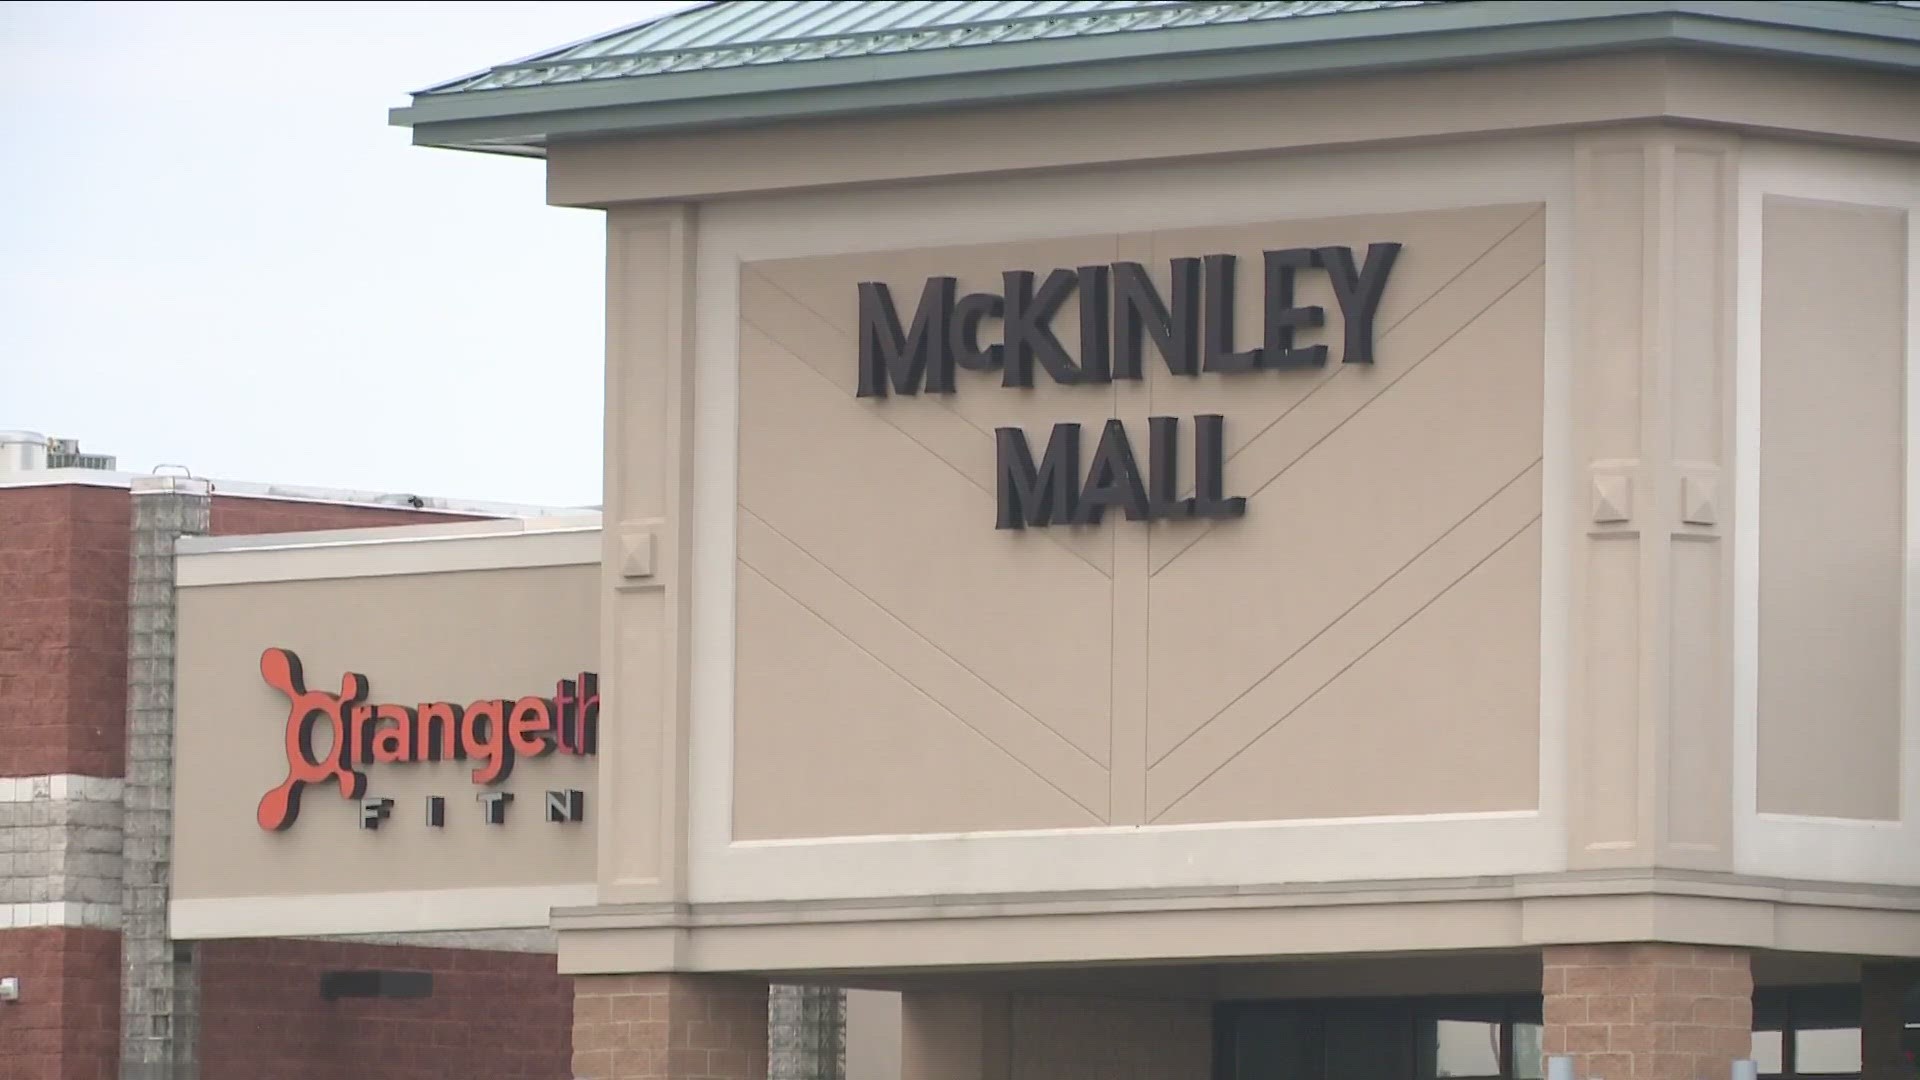 The McKinley mall was sold for almost 8 million dollars